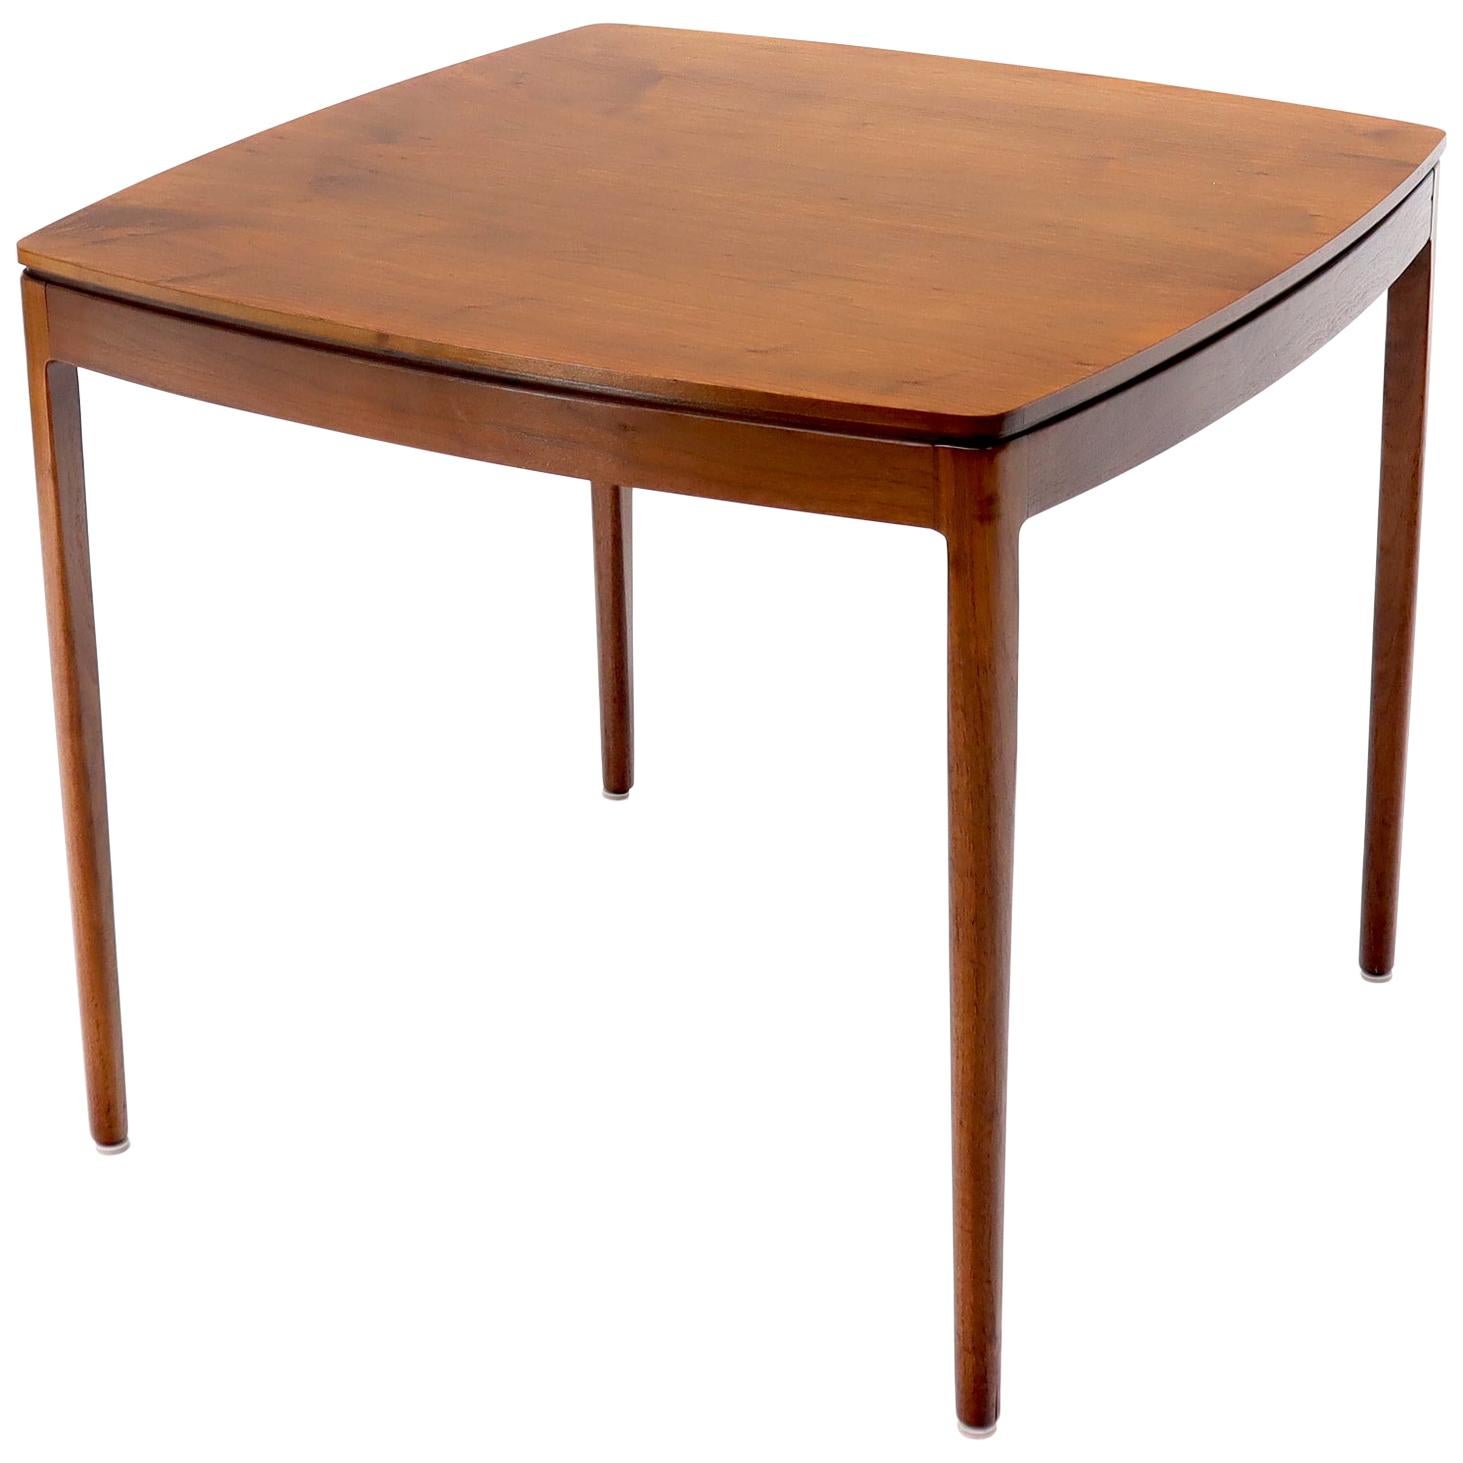 Midcentury Oiled Walnut Rounded Square Game Table